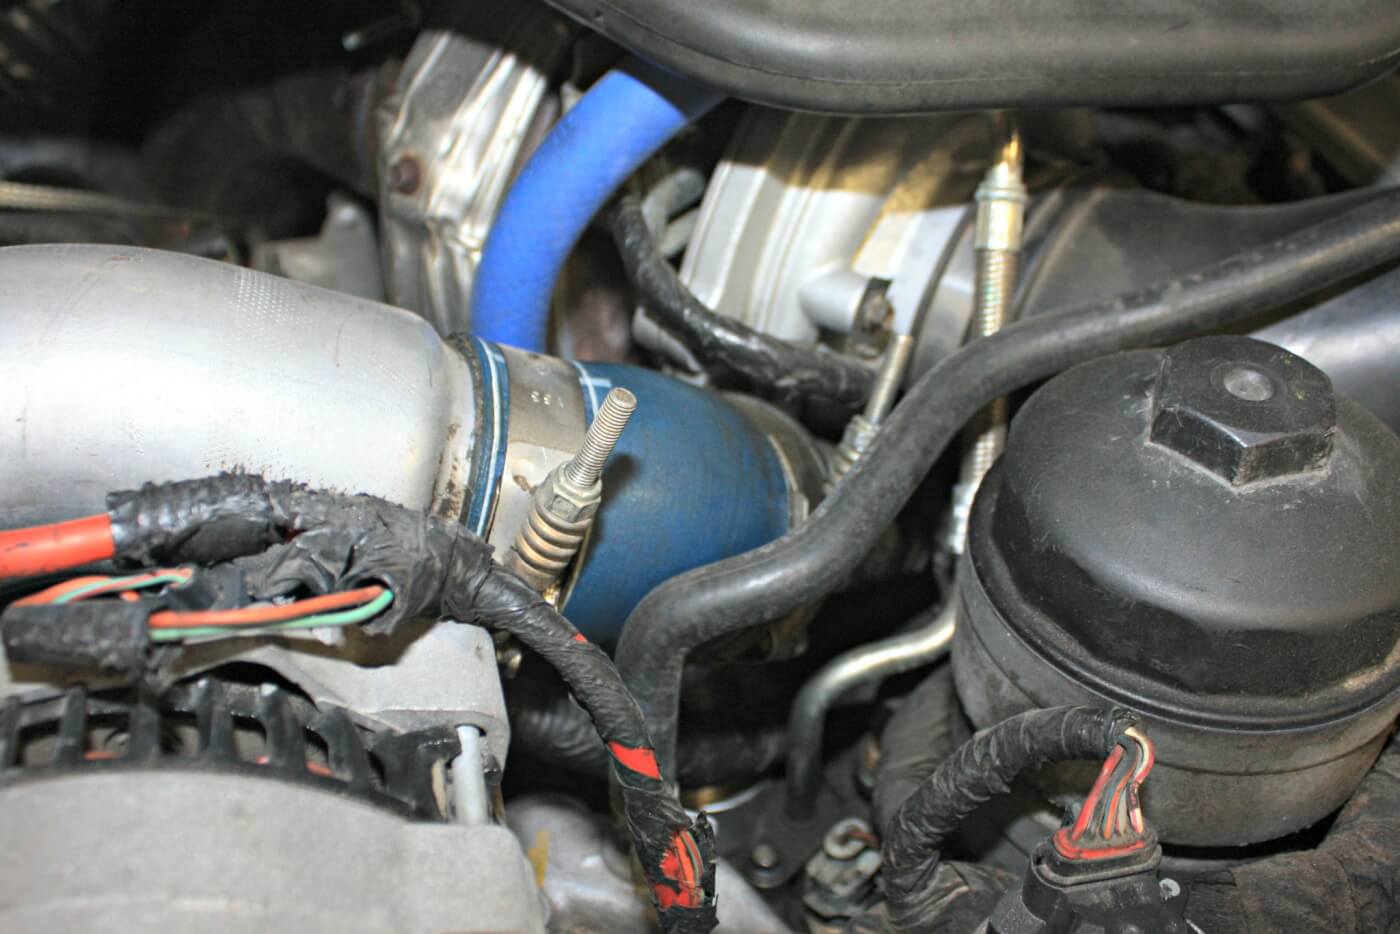 6. The passenger side (hot side) intercooler pipe connects directly to the turbocharger with this small 45-degree boot. This boot is prone to cracking and leaking, at which we were surprised to find hadn’t yet happened to this 135,000 mile truck.